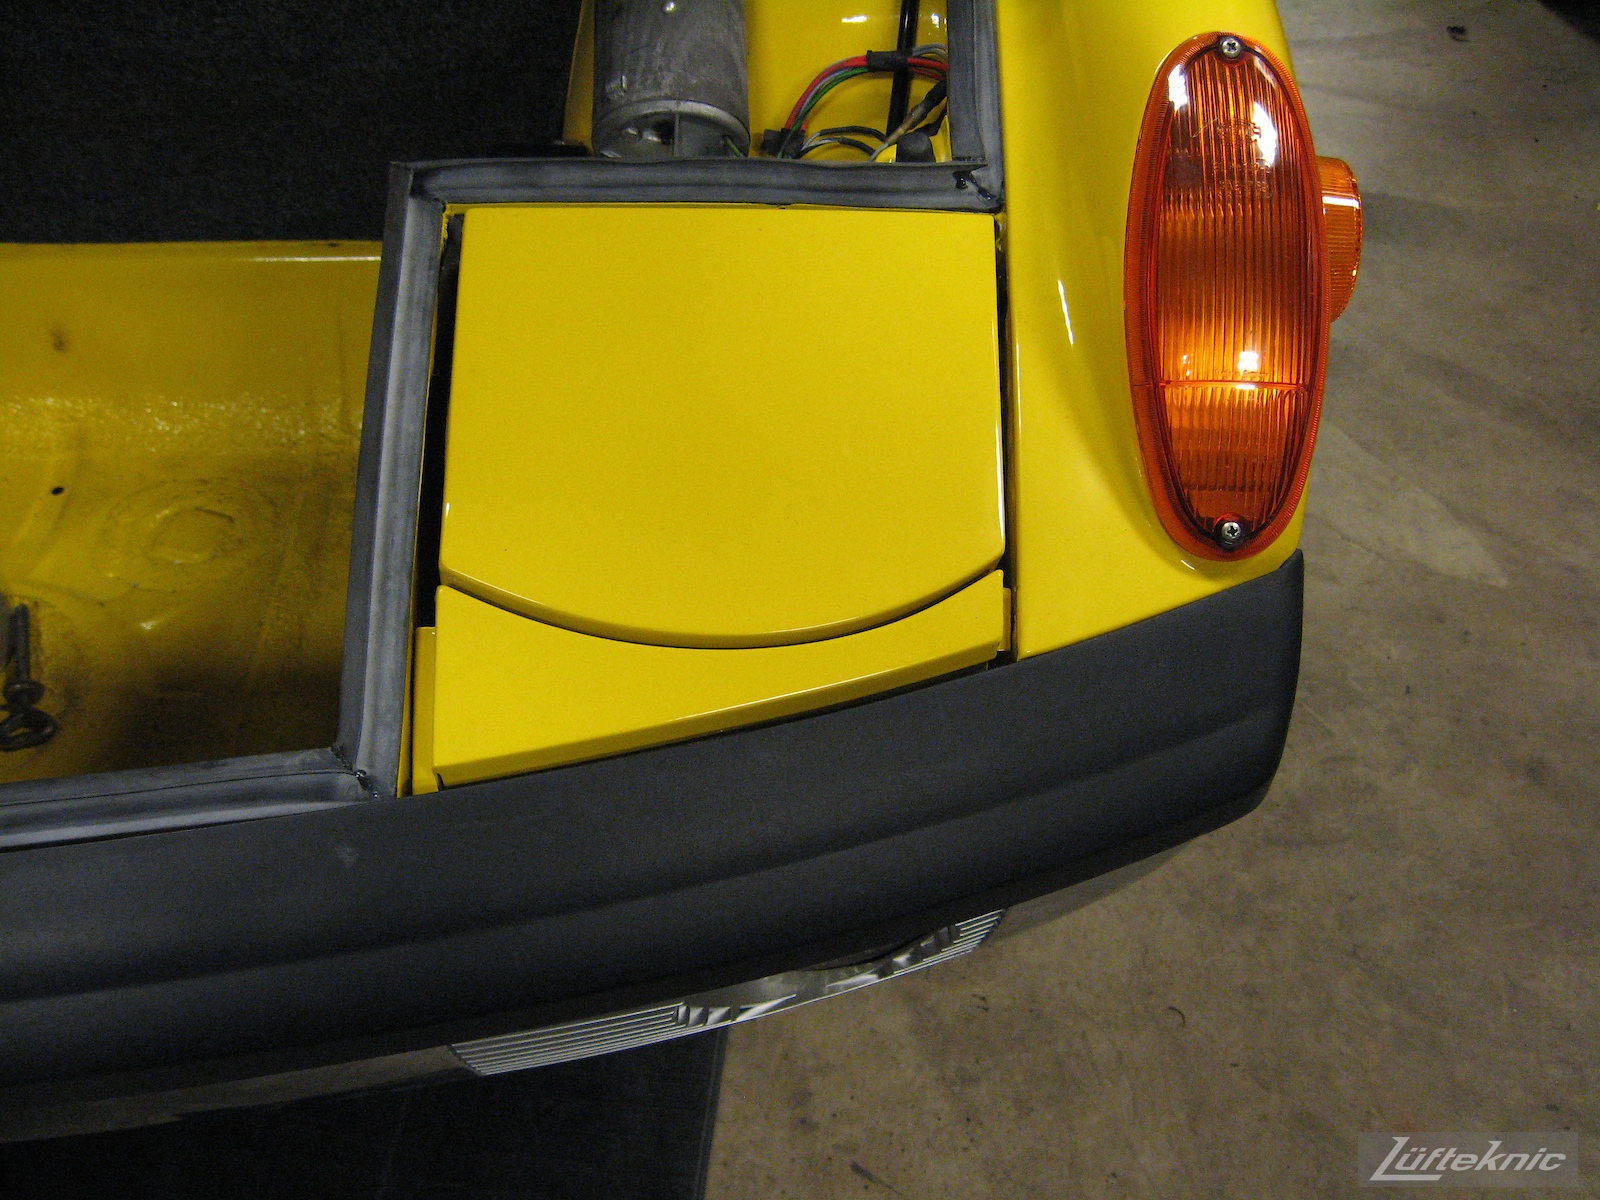 Front bumper and lighting details on a restored yellow Porsche 914 at Lufteknic.